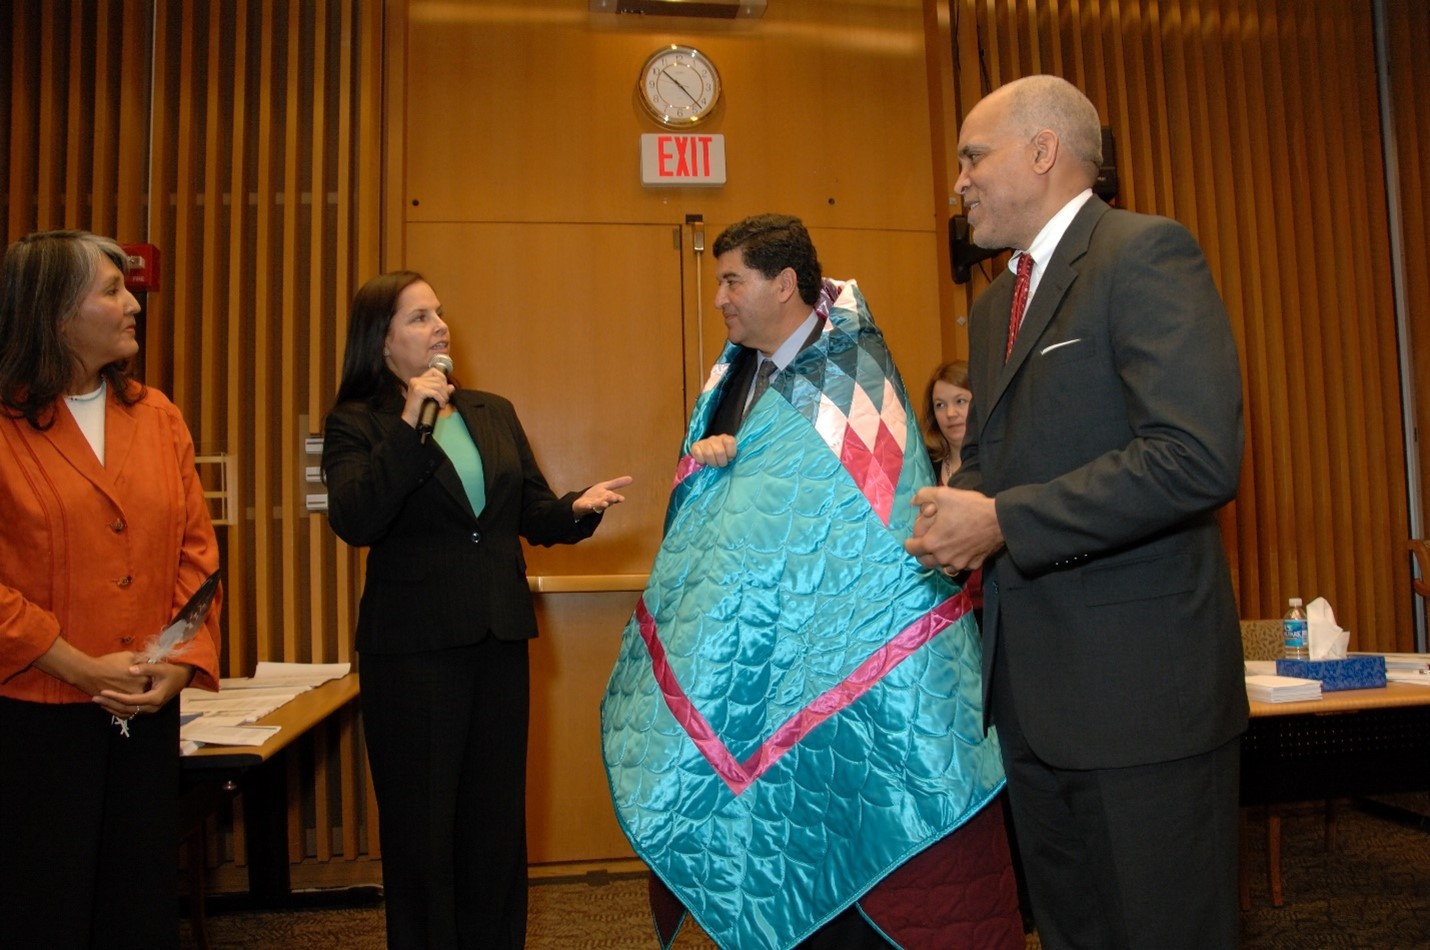 Dr Zerhouni is standing in a conference room wrapped in a star quilt, as a woman with dark hair holds a microphone, and appears to be singing